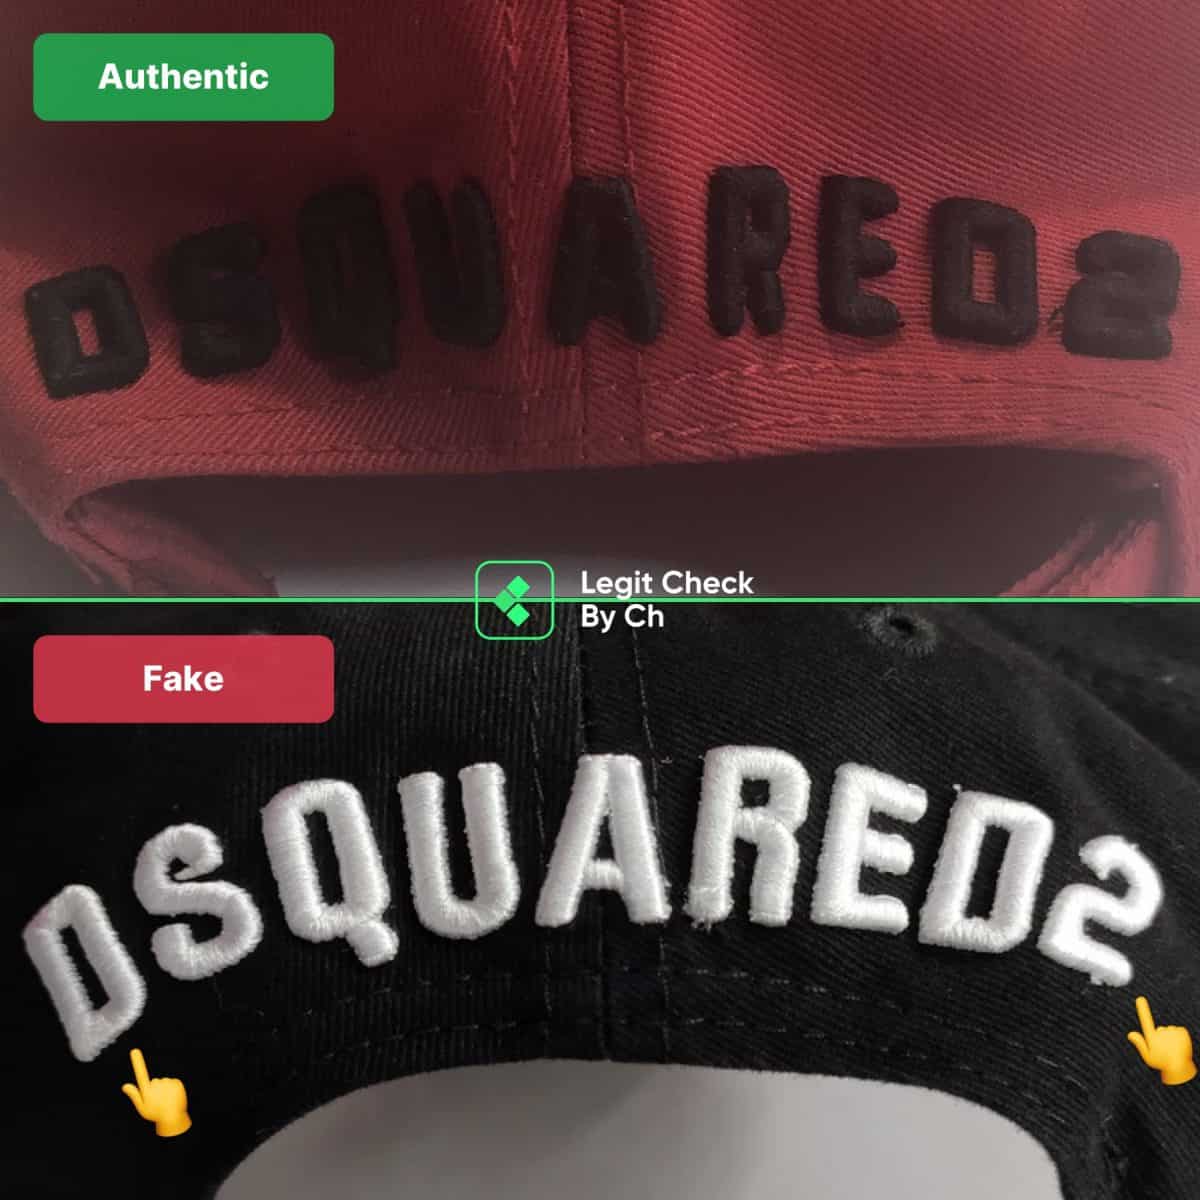 Onrecht Ontwapening Extreem belangrijk How To Spot Fake Dsquared2 ICON Hats - Legit Check By Ch